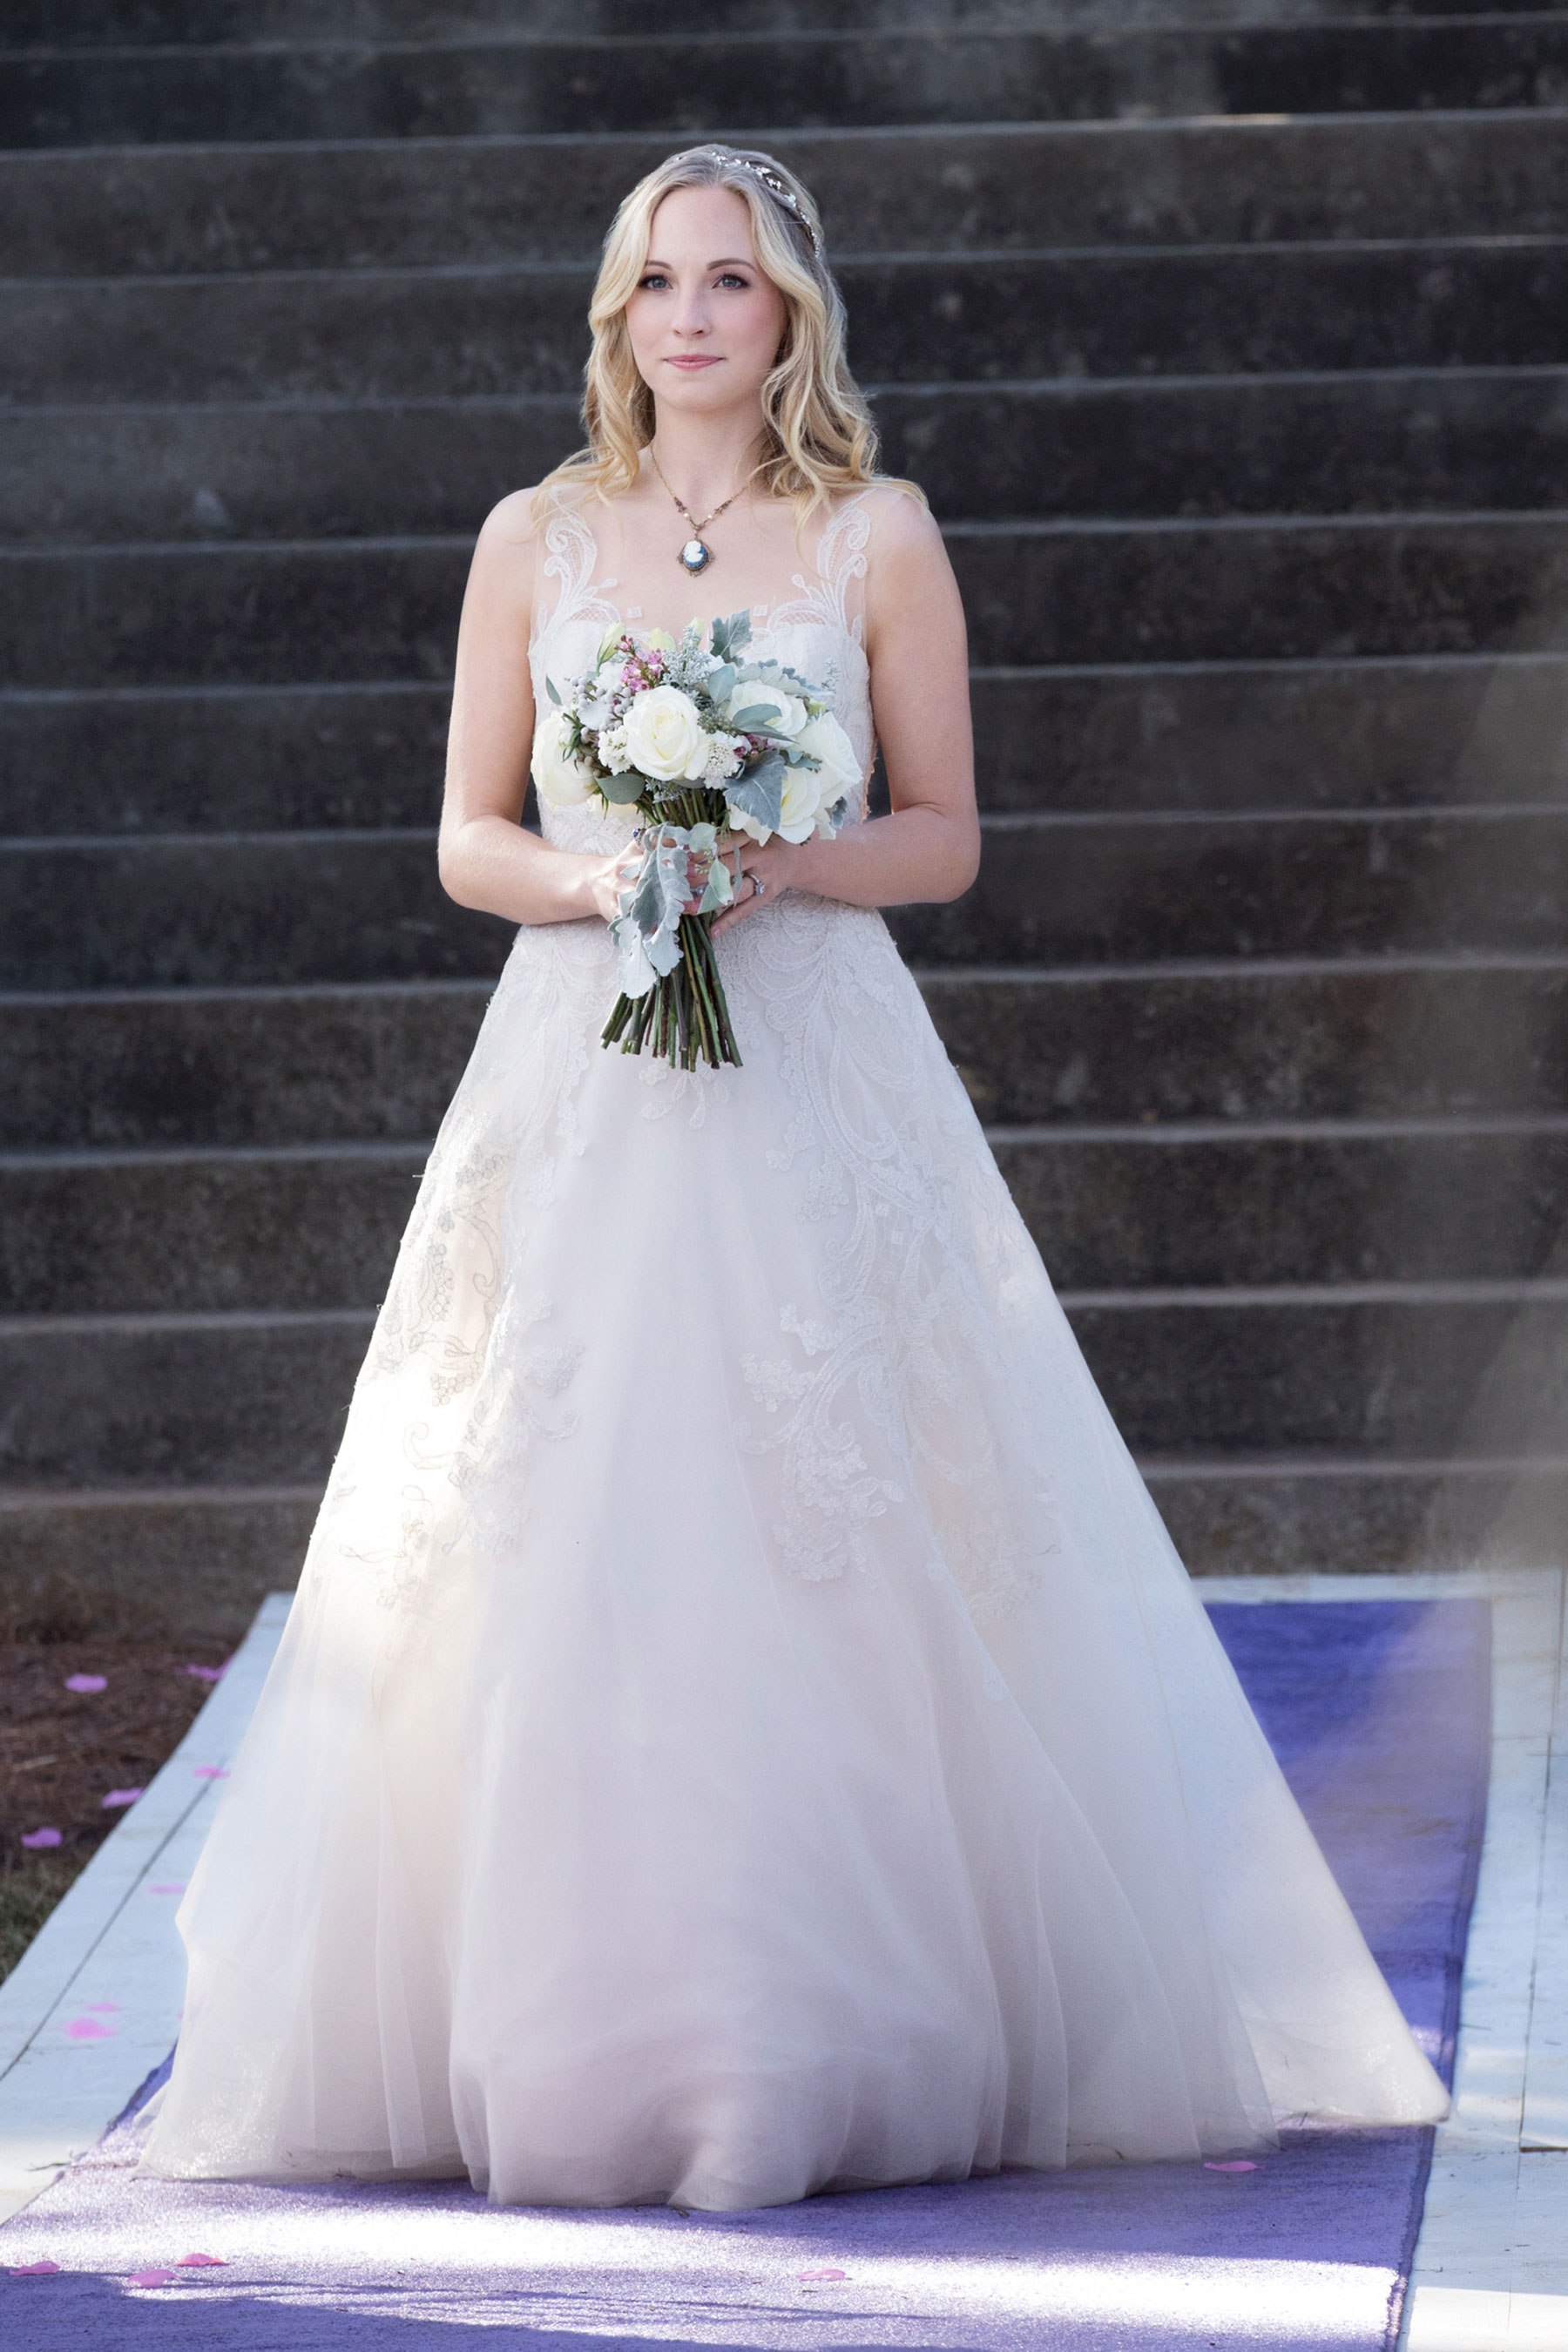 The Vampire Diaries -- "We're Planning a June Wedding" -- Image Number: VD815c_0178.jpg -- Pictured: Candice King as Caroline -- Photo: Bob Mahoney/The CW -- ÃÂ© 2017 The CW Network, LLC. All Rights Reserved.